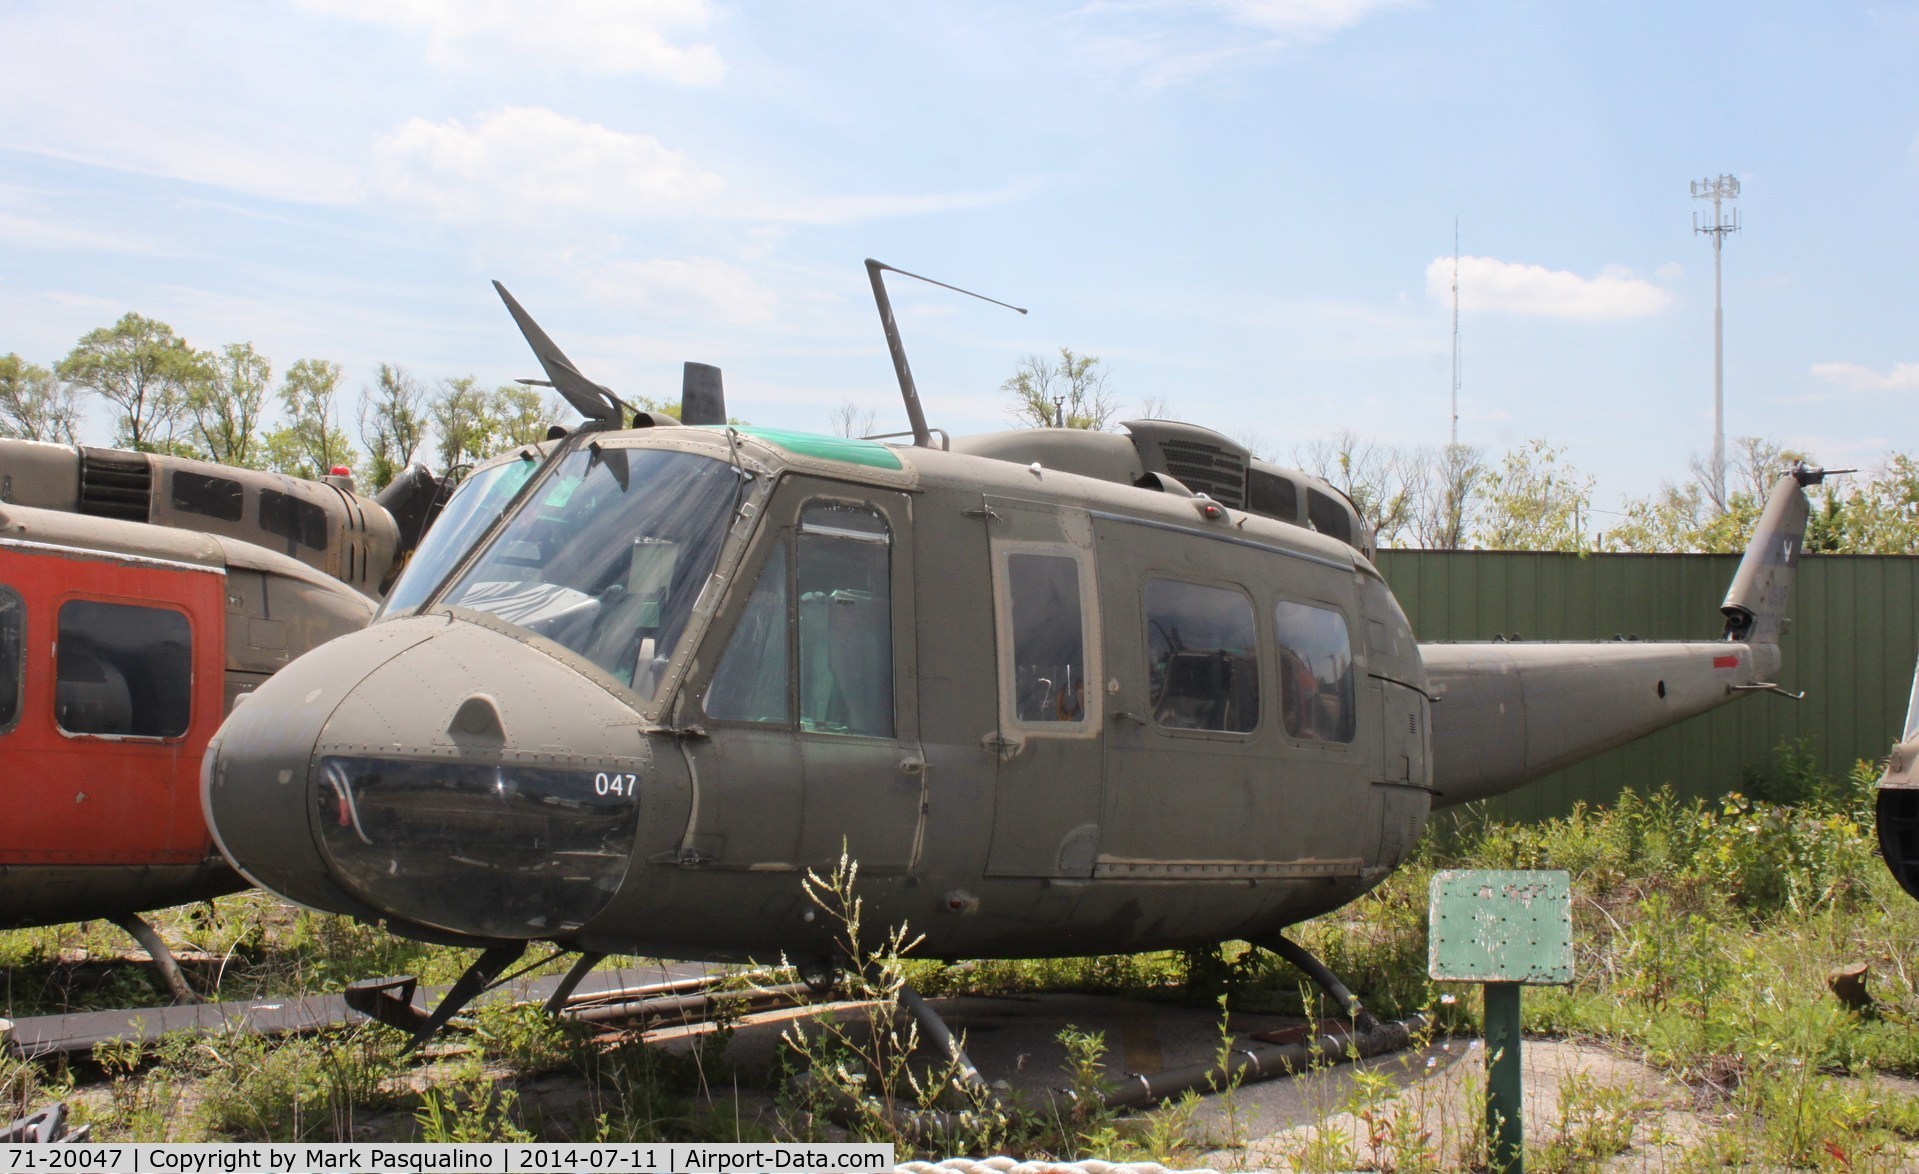 71-20047, 1971 Bell UH-1H Iroquois C/N 12871, Bell UH-1H